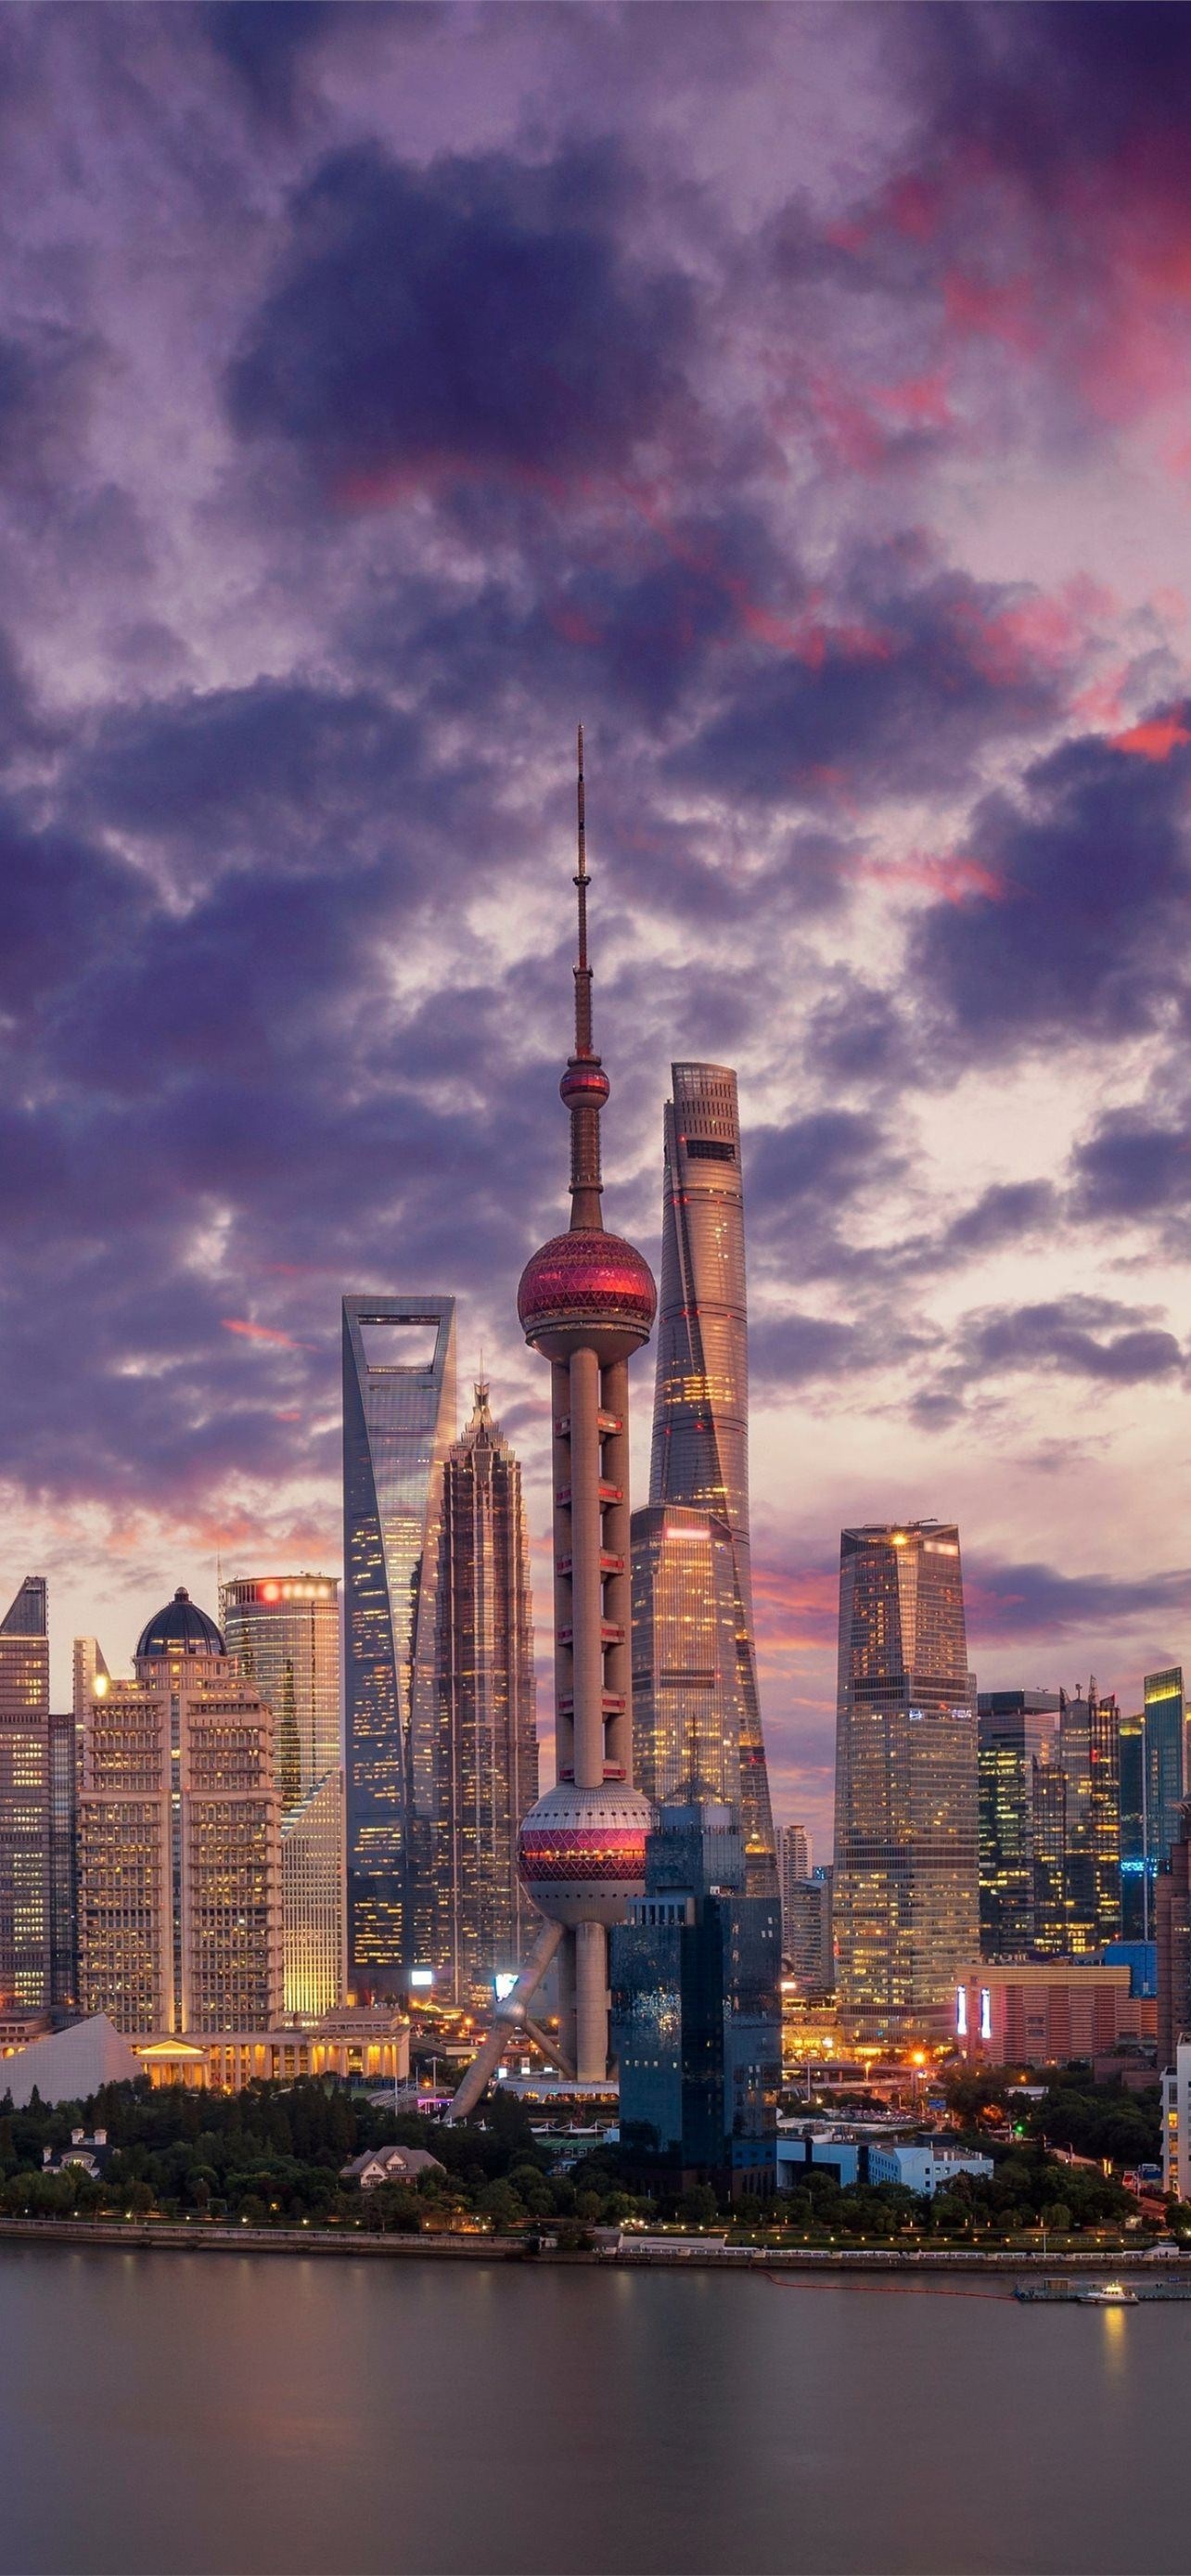 Shanghai Skyline, Best iPhone wallpapers, Stunning cityscapes, Modern architecture, 1290x2780 HD Phone